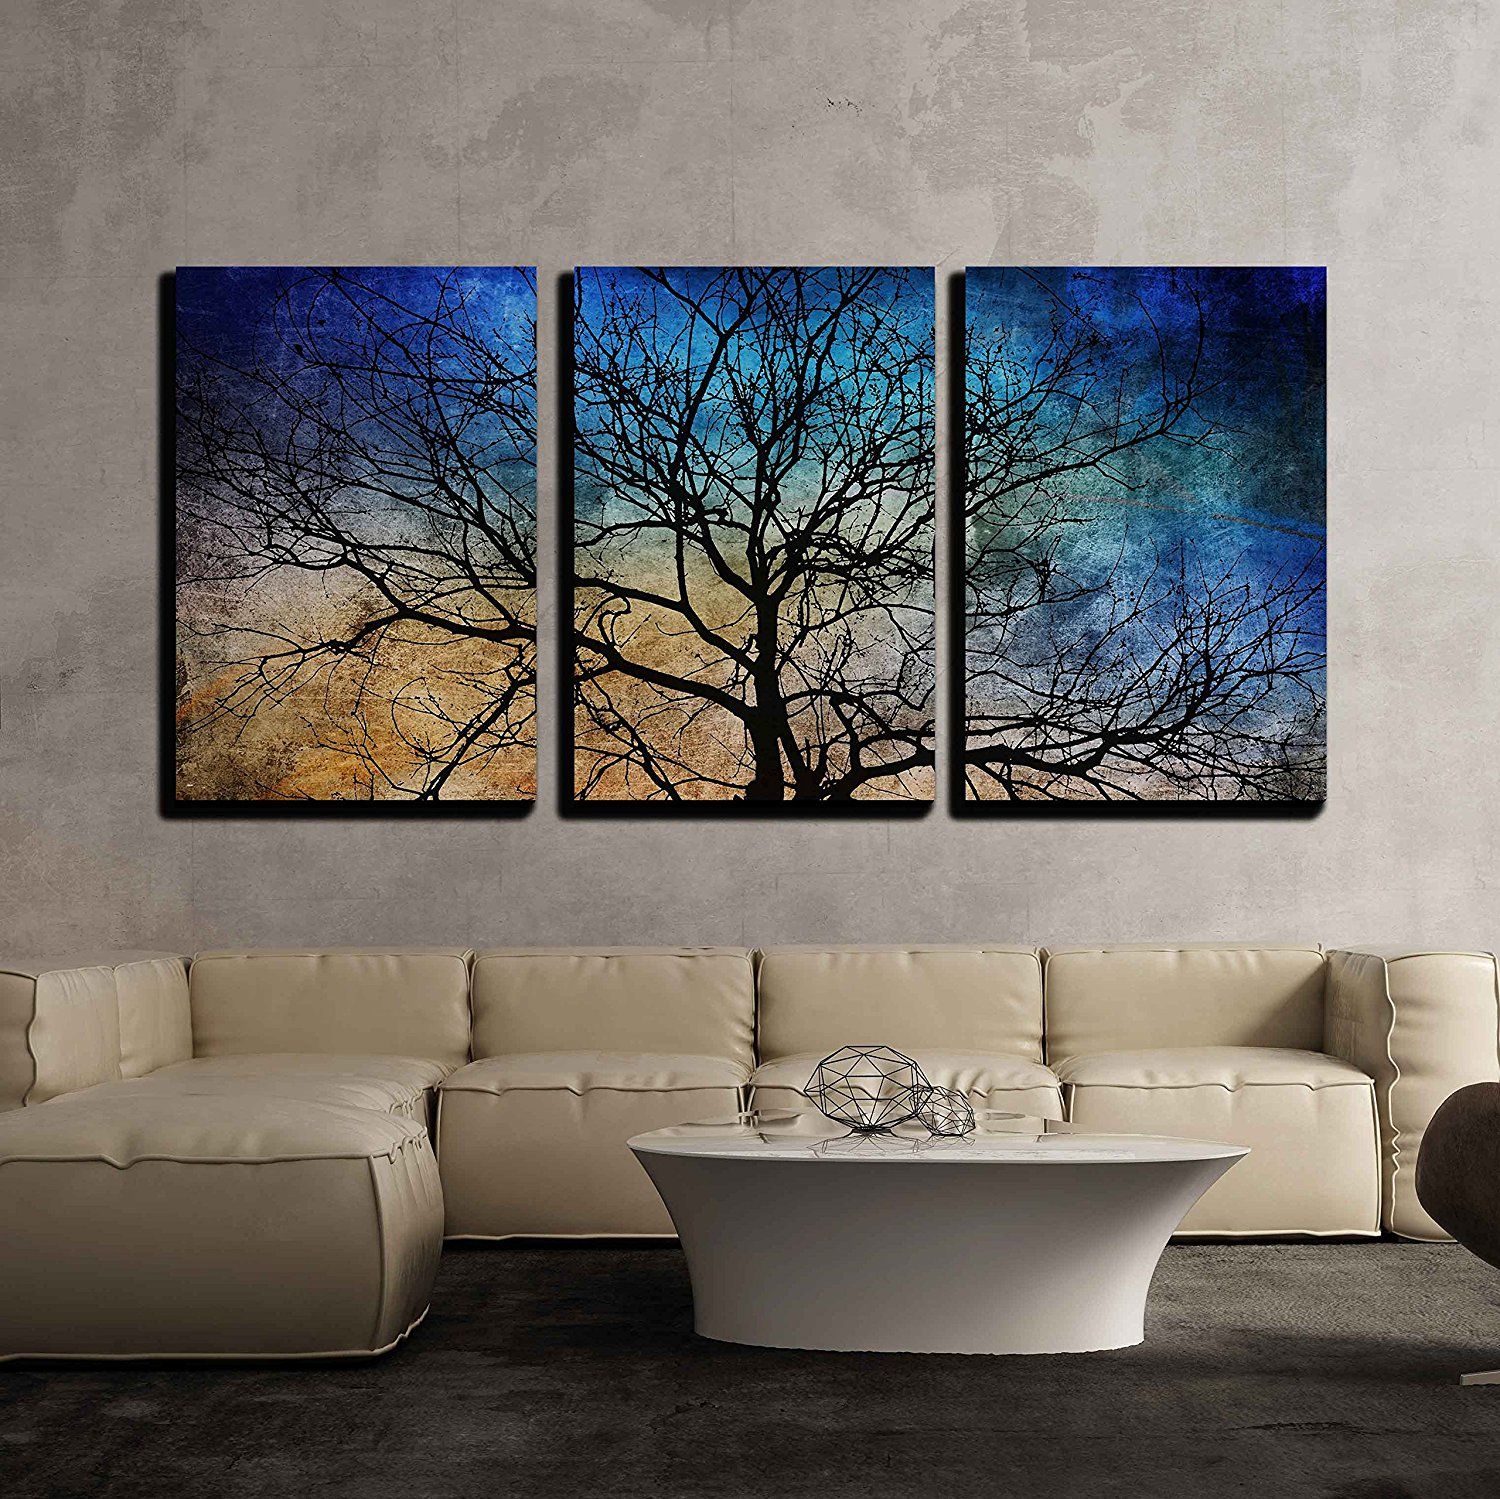 Wall26 3 Piece Canvas Wall Art – Black Tree Branches On Abstract Colorful  Background – Modern Home Decor Stretched And Framed Ready To Hang –  16"x24"x3 Panels – Walmart With Latest Colorful Branching Wall Art (View 10 of 20)